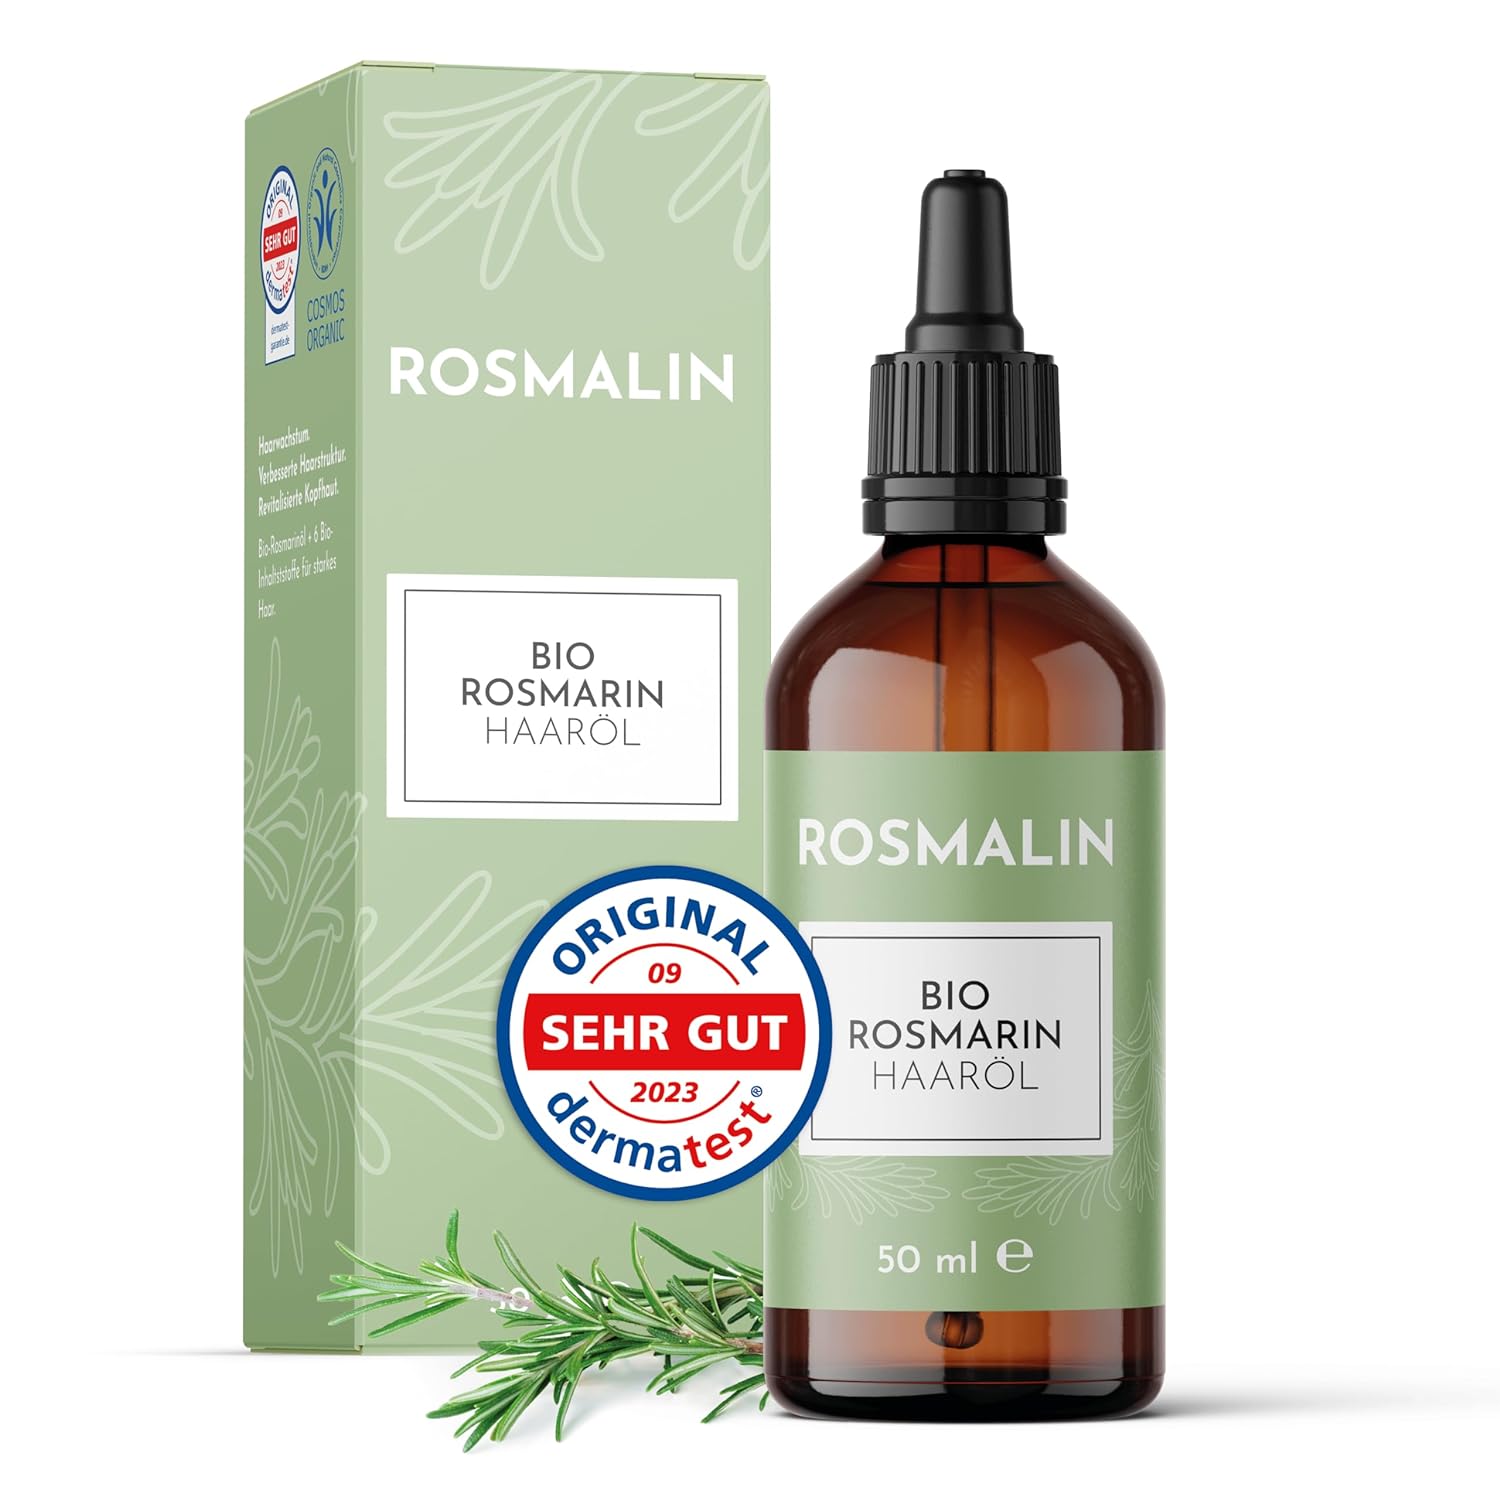 Rosmalin® Rosemary Oil for Hair & Scalp, Accelerate Hair Growth, 100% Organic Hair Oil, Dermatologically Tested, Suitable for Men and Women, Certified Natural Cosmetics